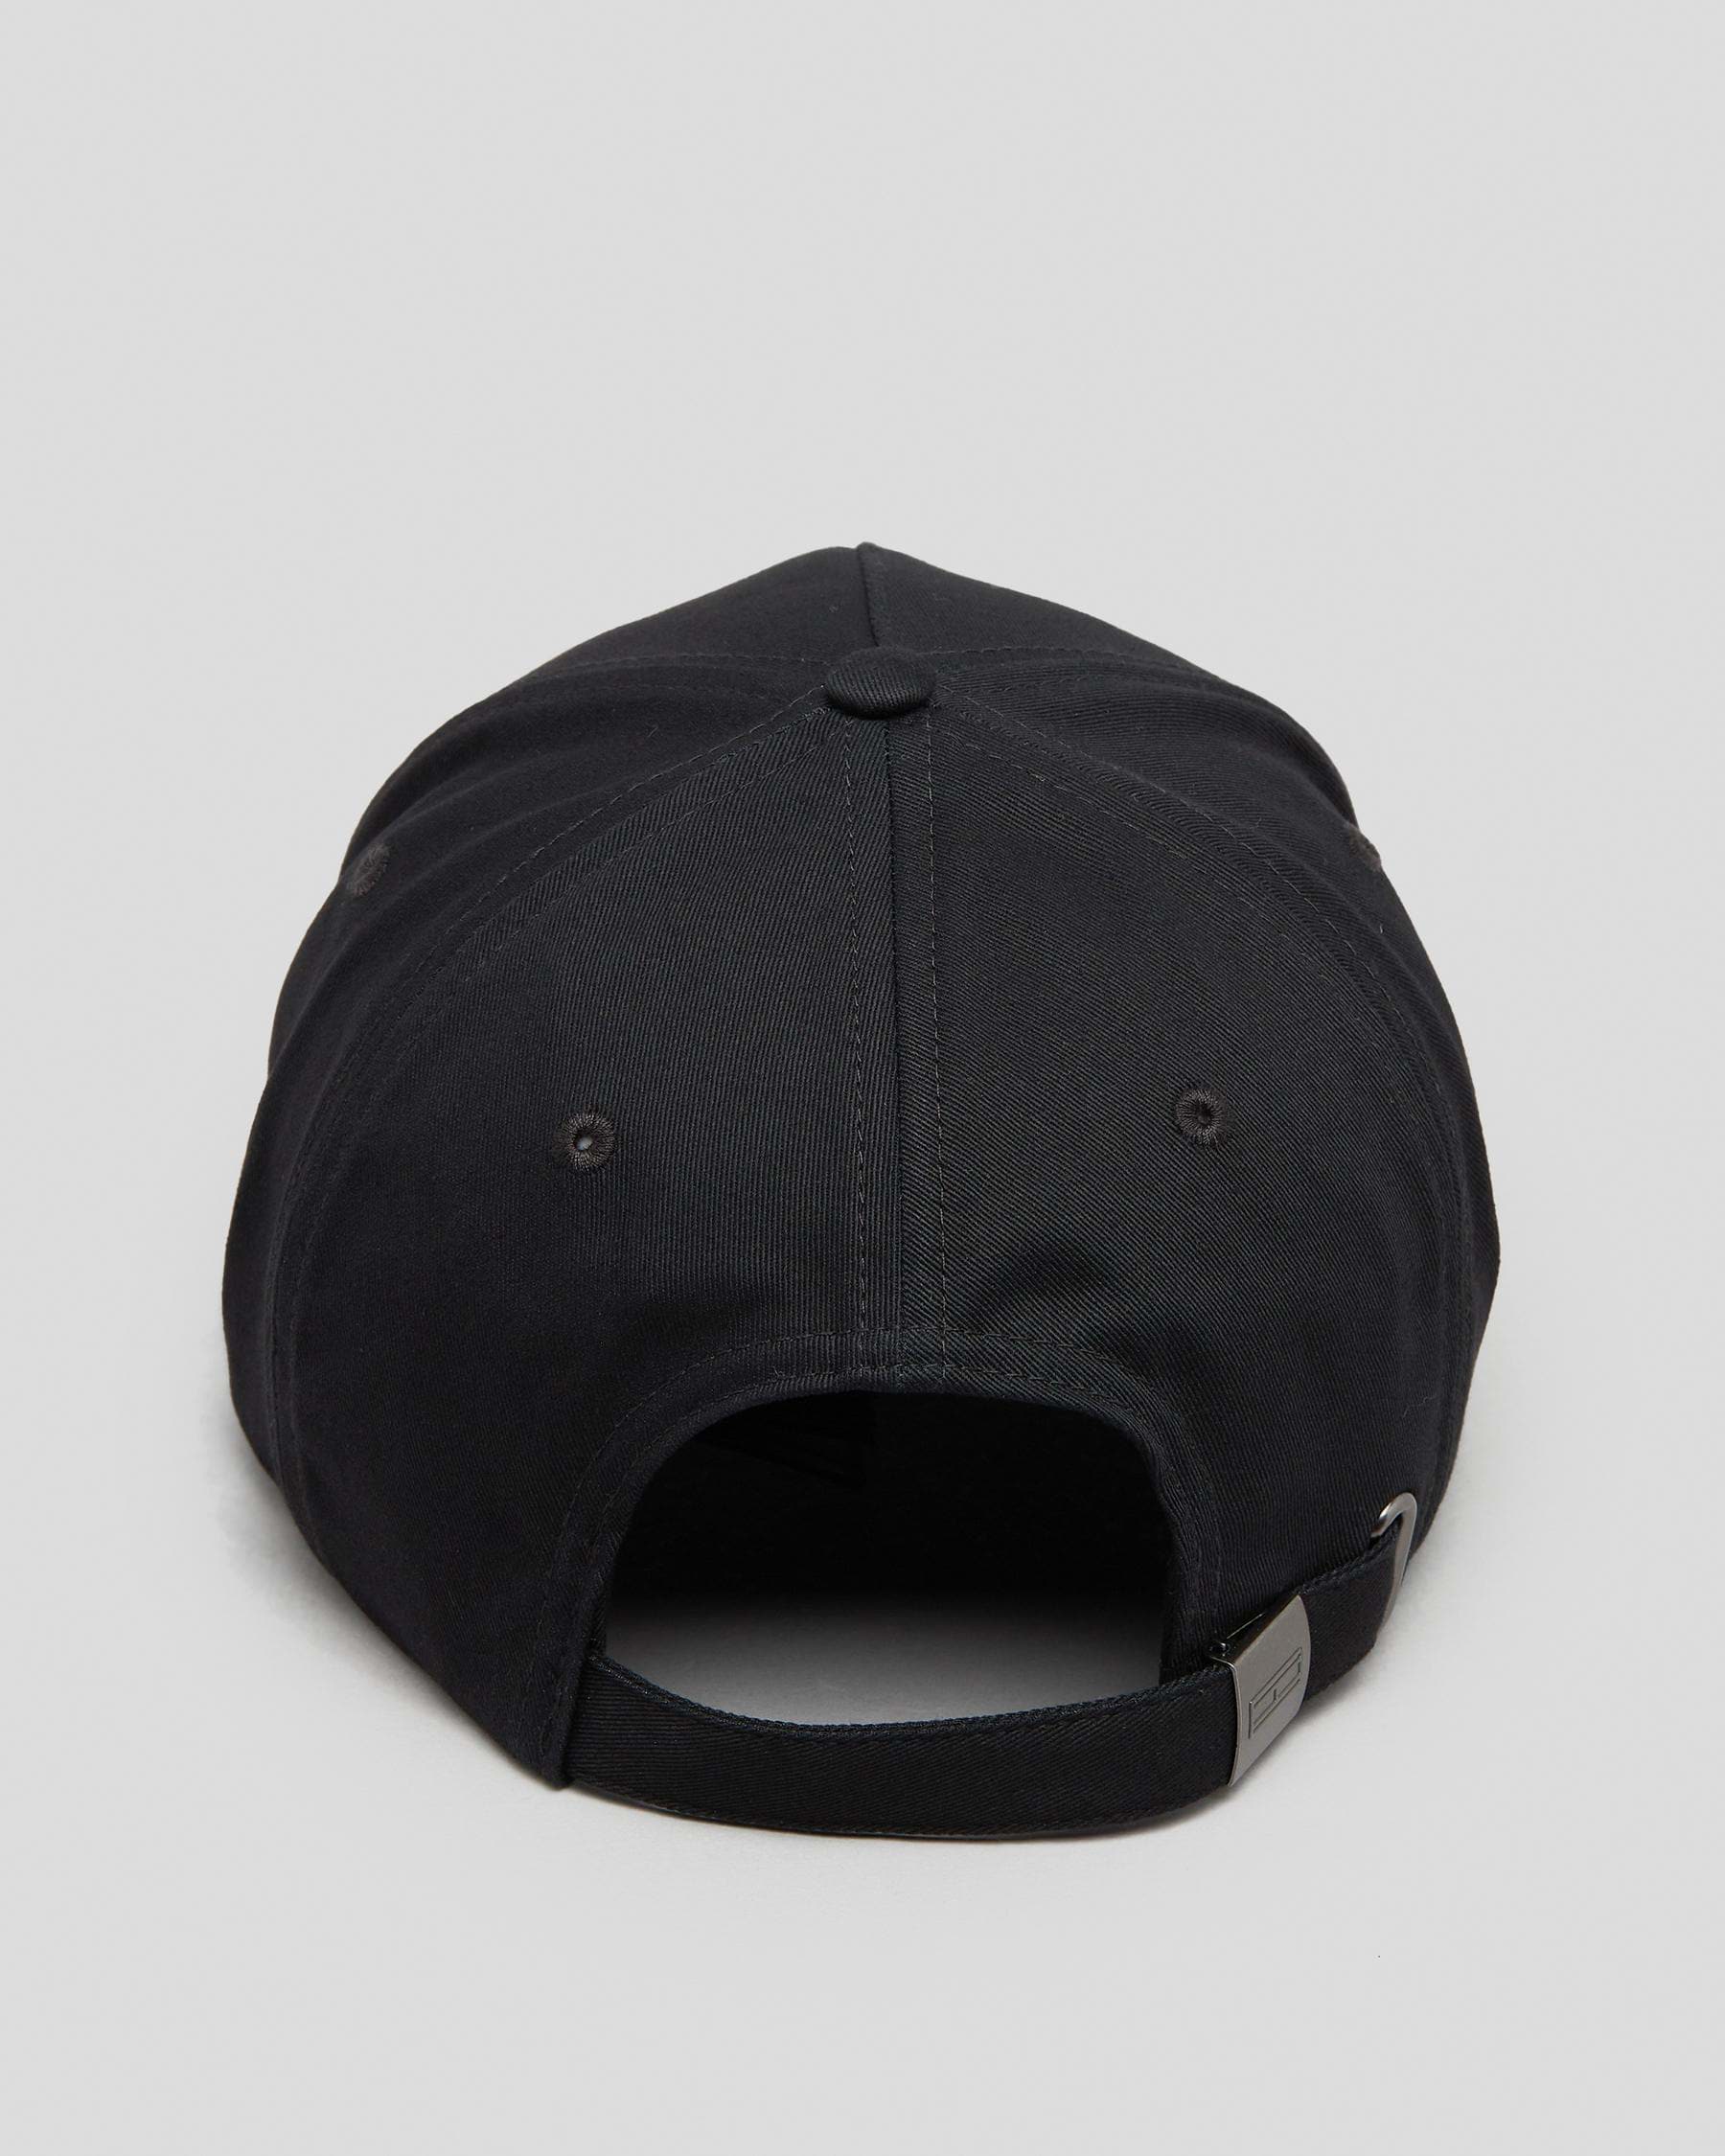 & Tommy TJM Flag Shipping City Black Easy United - States In Cap FREE* - Beach Returns Hilfiger